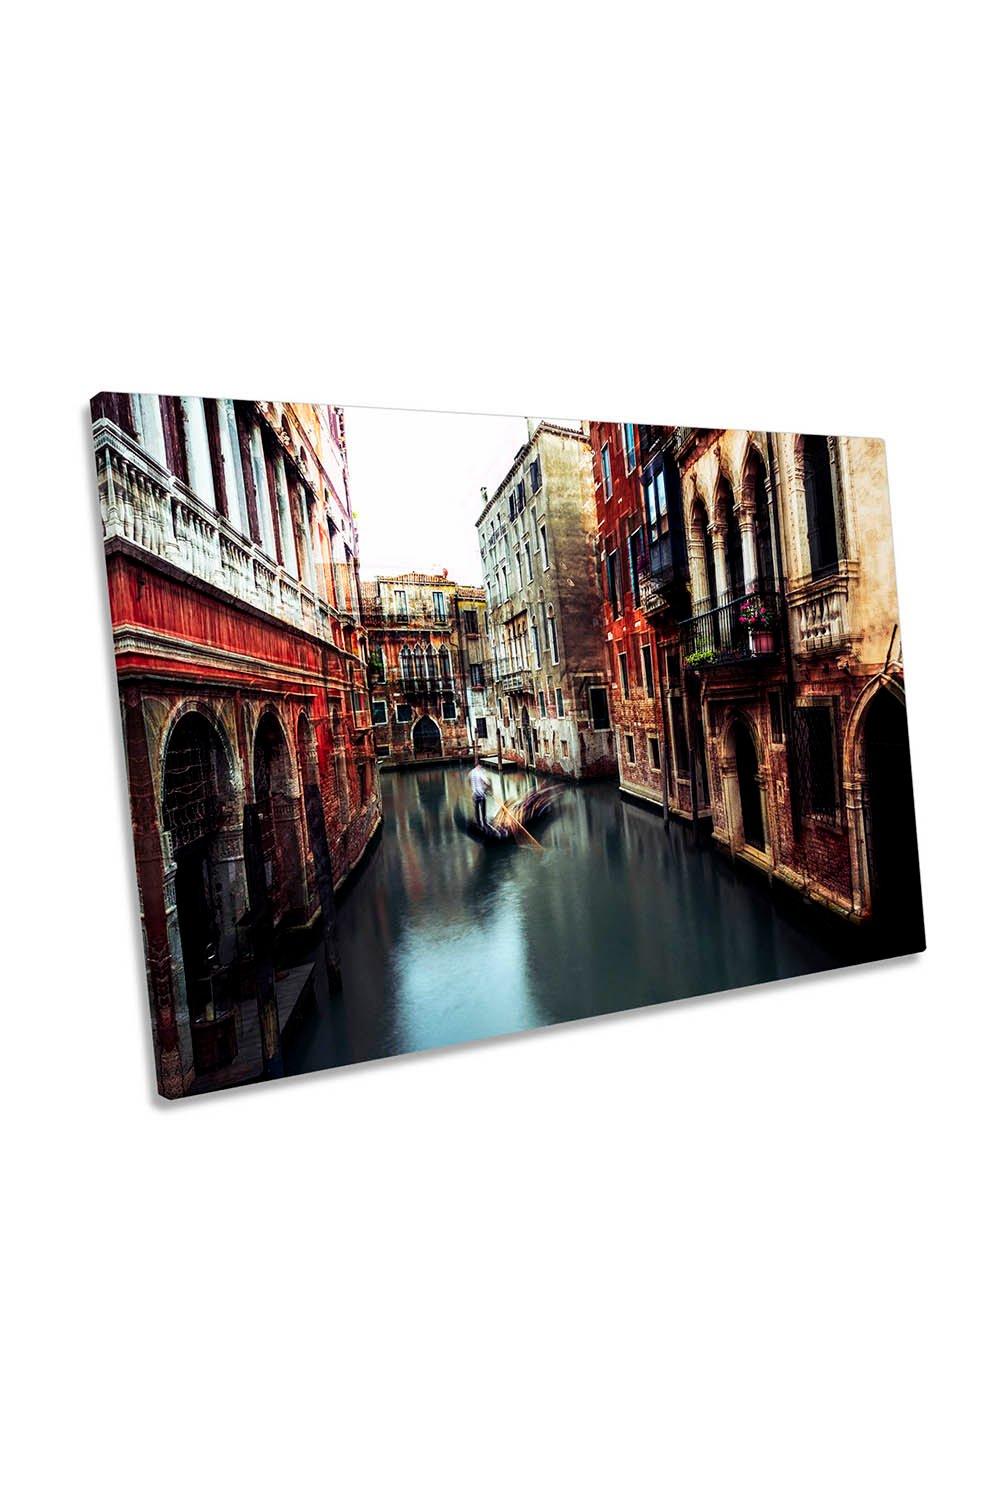 The Gondolier Venice Italy Canal Canvas Wall Art Picture Print